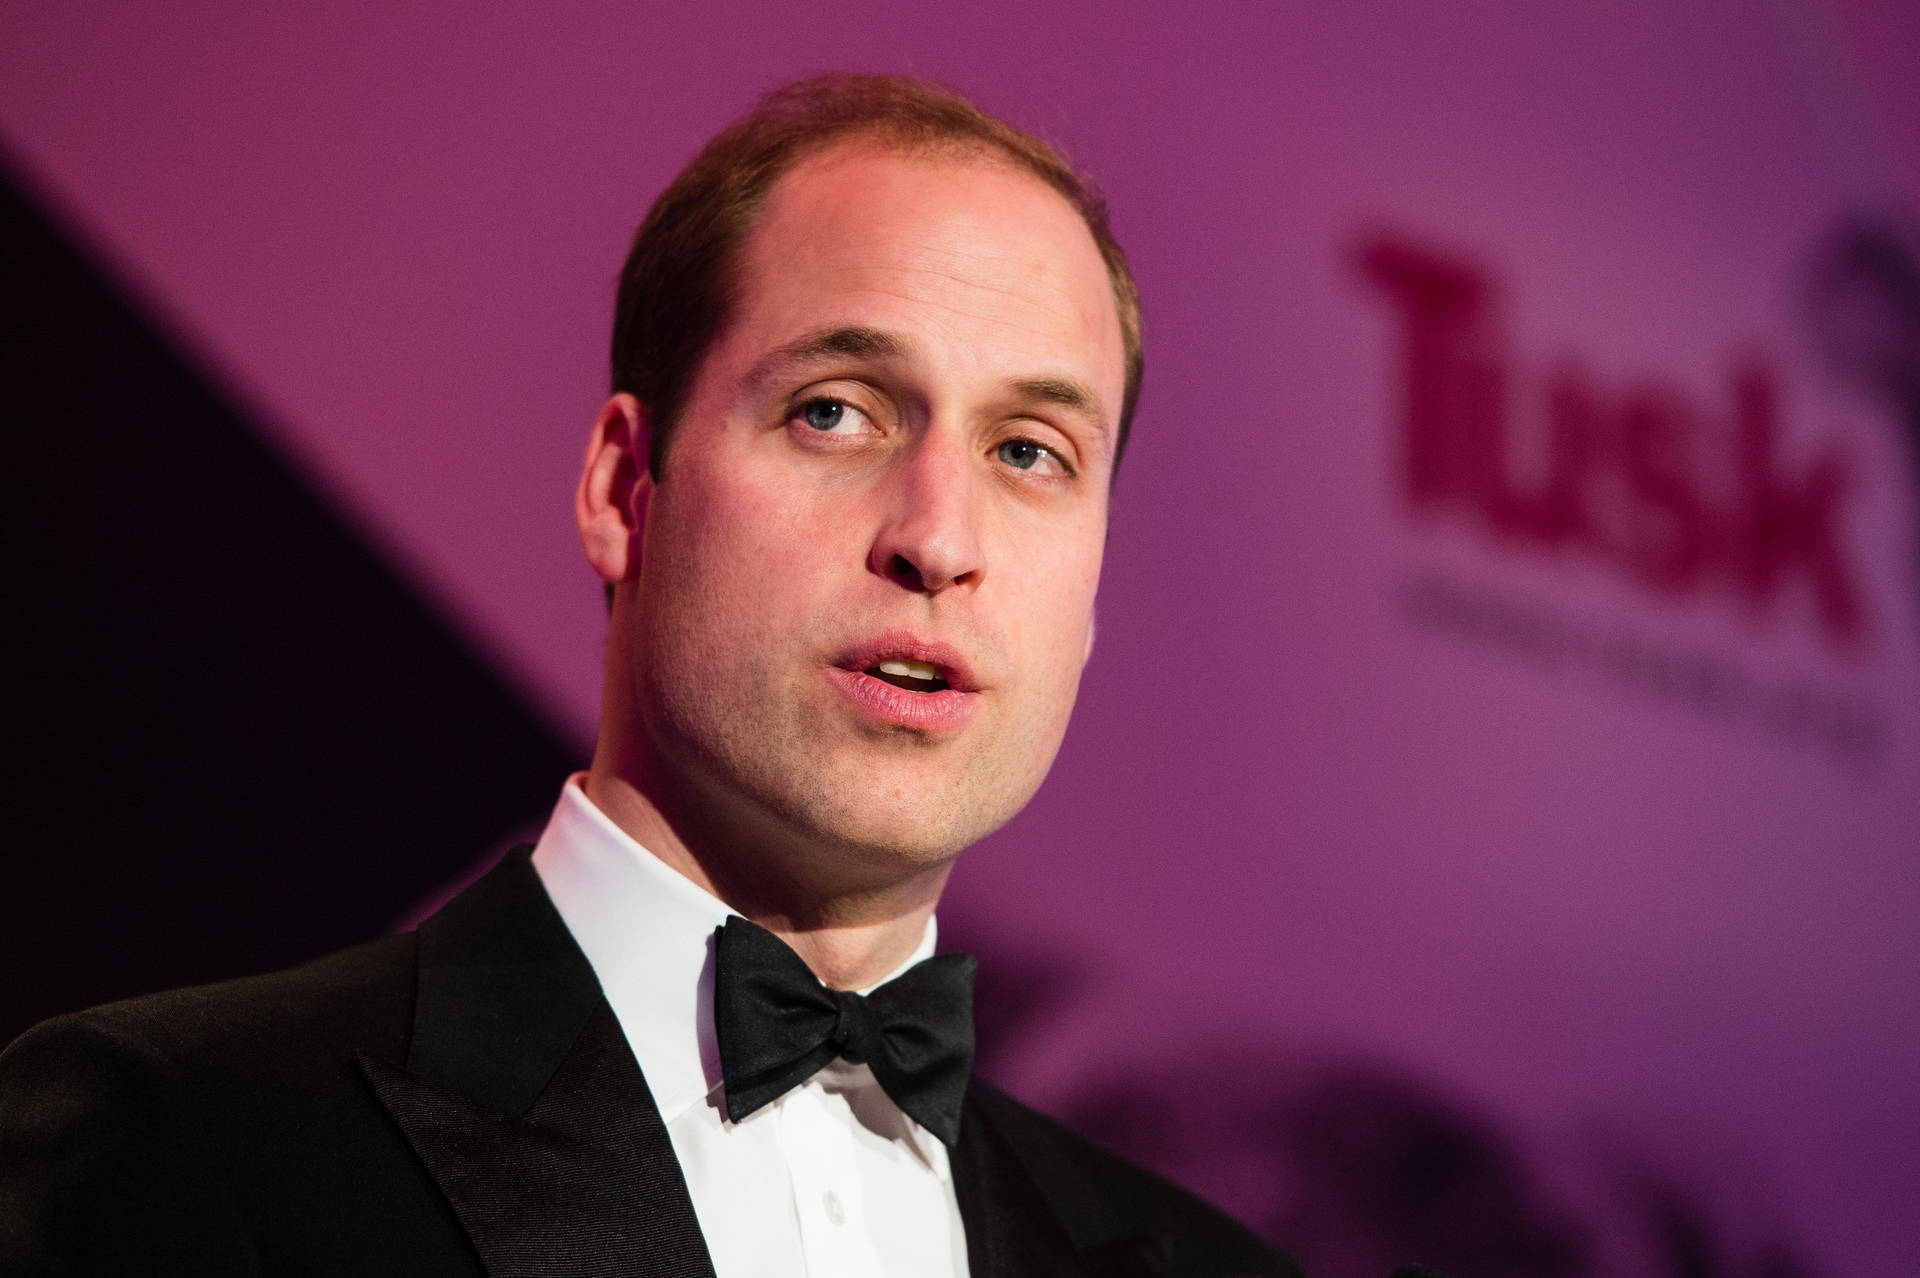 Prince William Dressed for a Formal Event Wallpaper